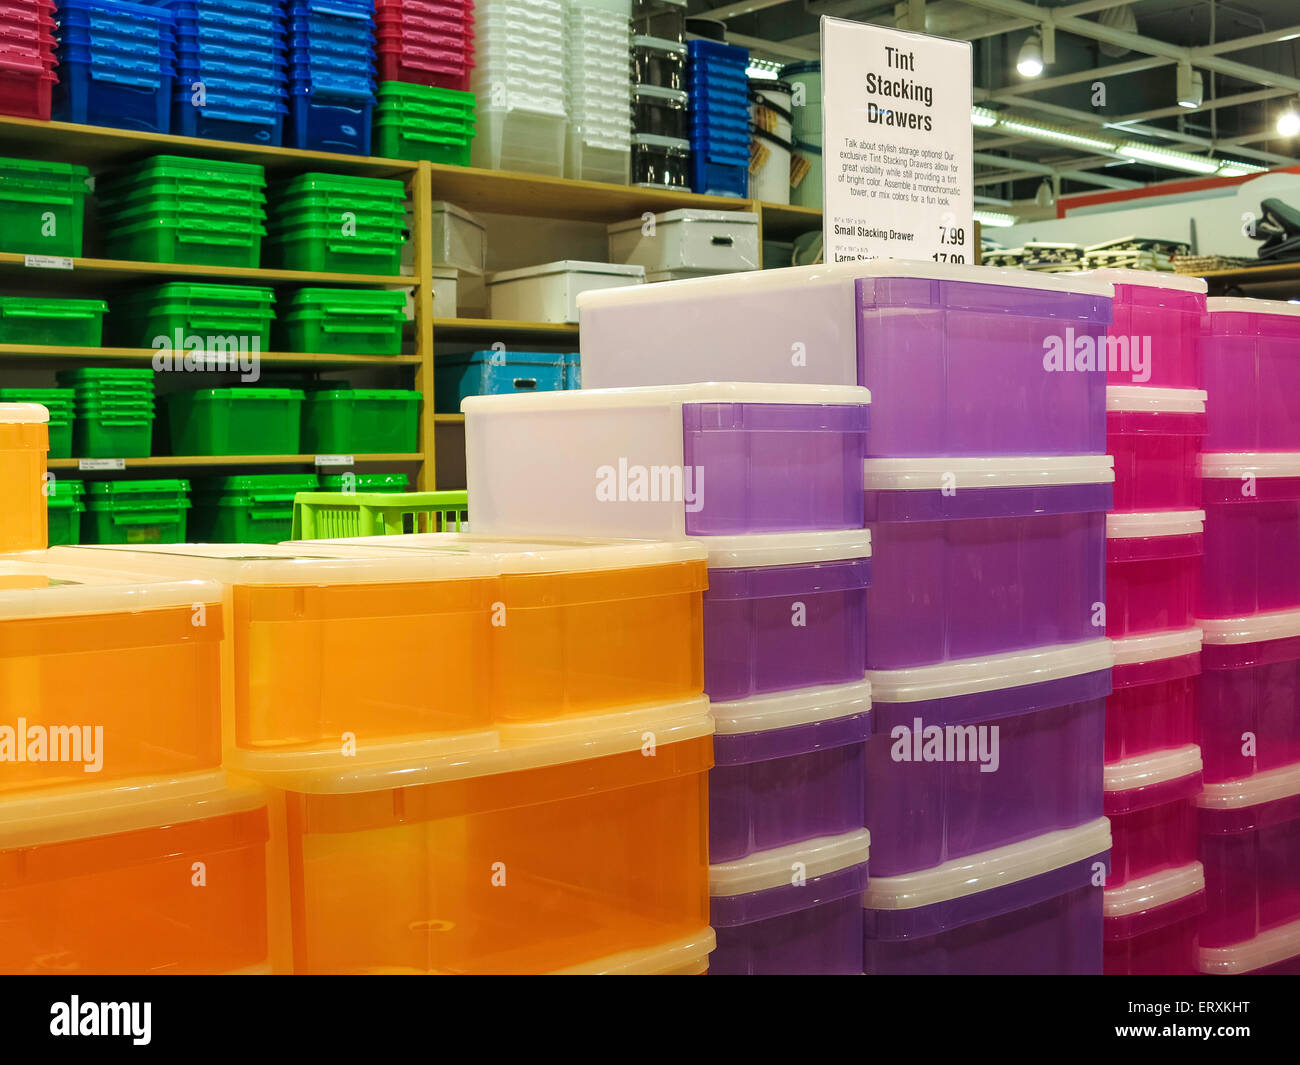 Big Bunch Of Colorful Plastic Sorting Bins And Tubs Stock Photo, Picture  and Royalty Free Image. Image 34639268.